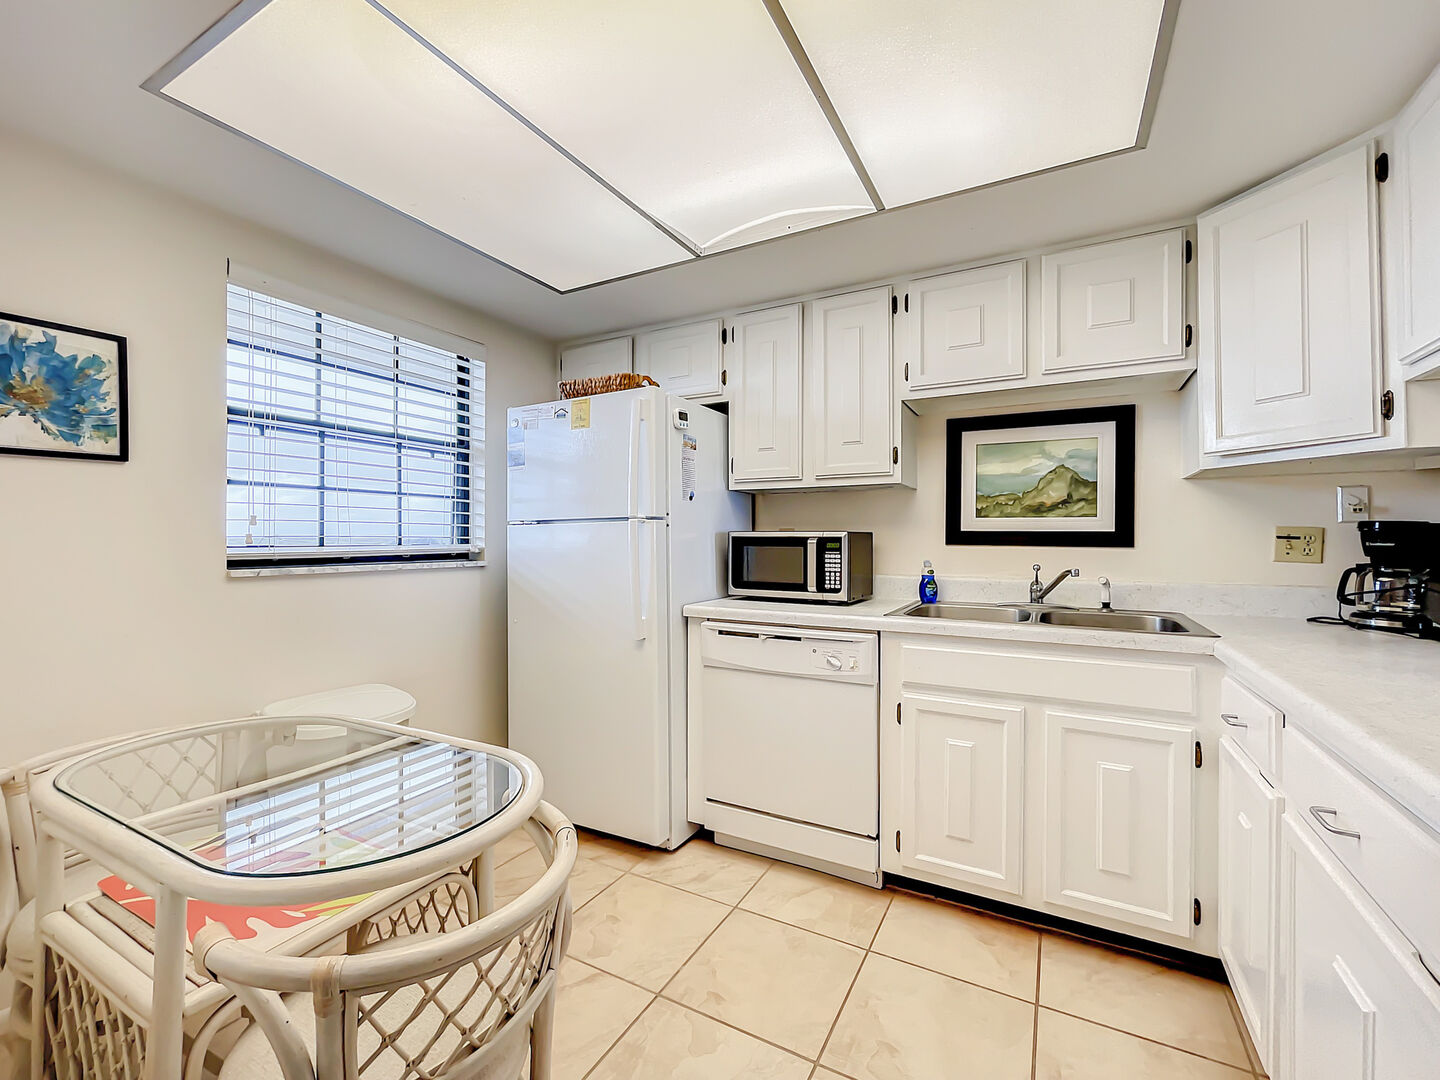 Full Kitchen with White Cabinet, Appliances, and Sky light